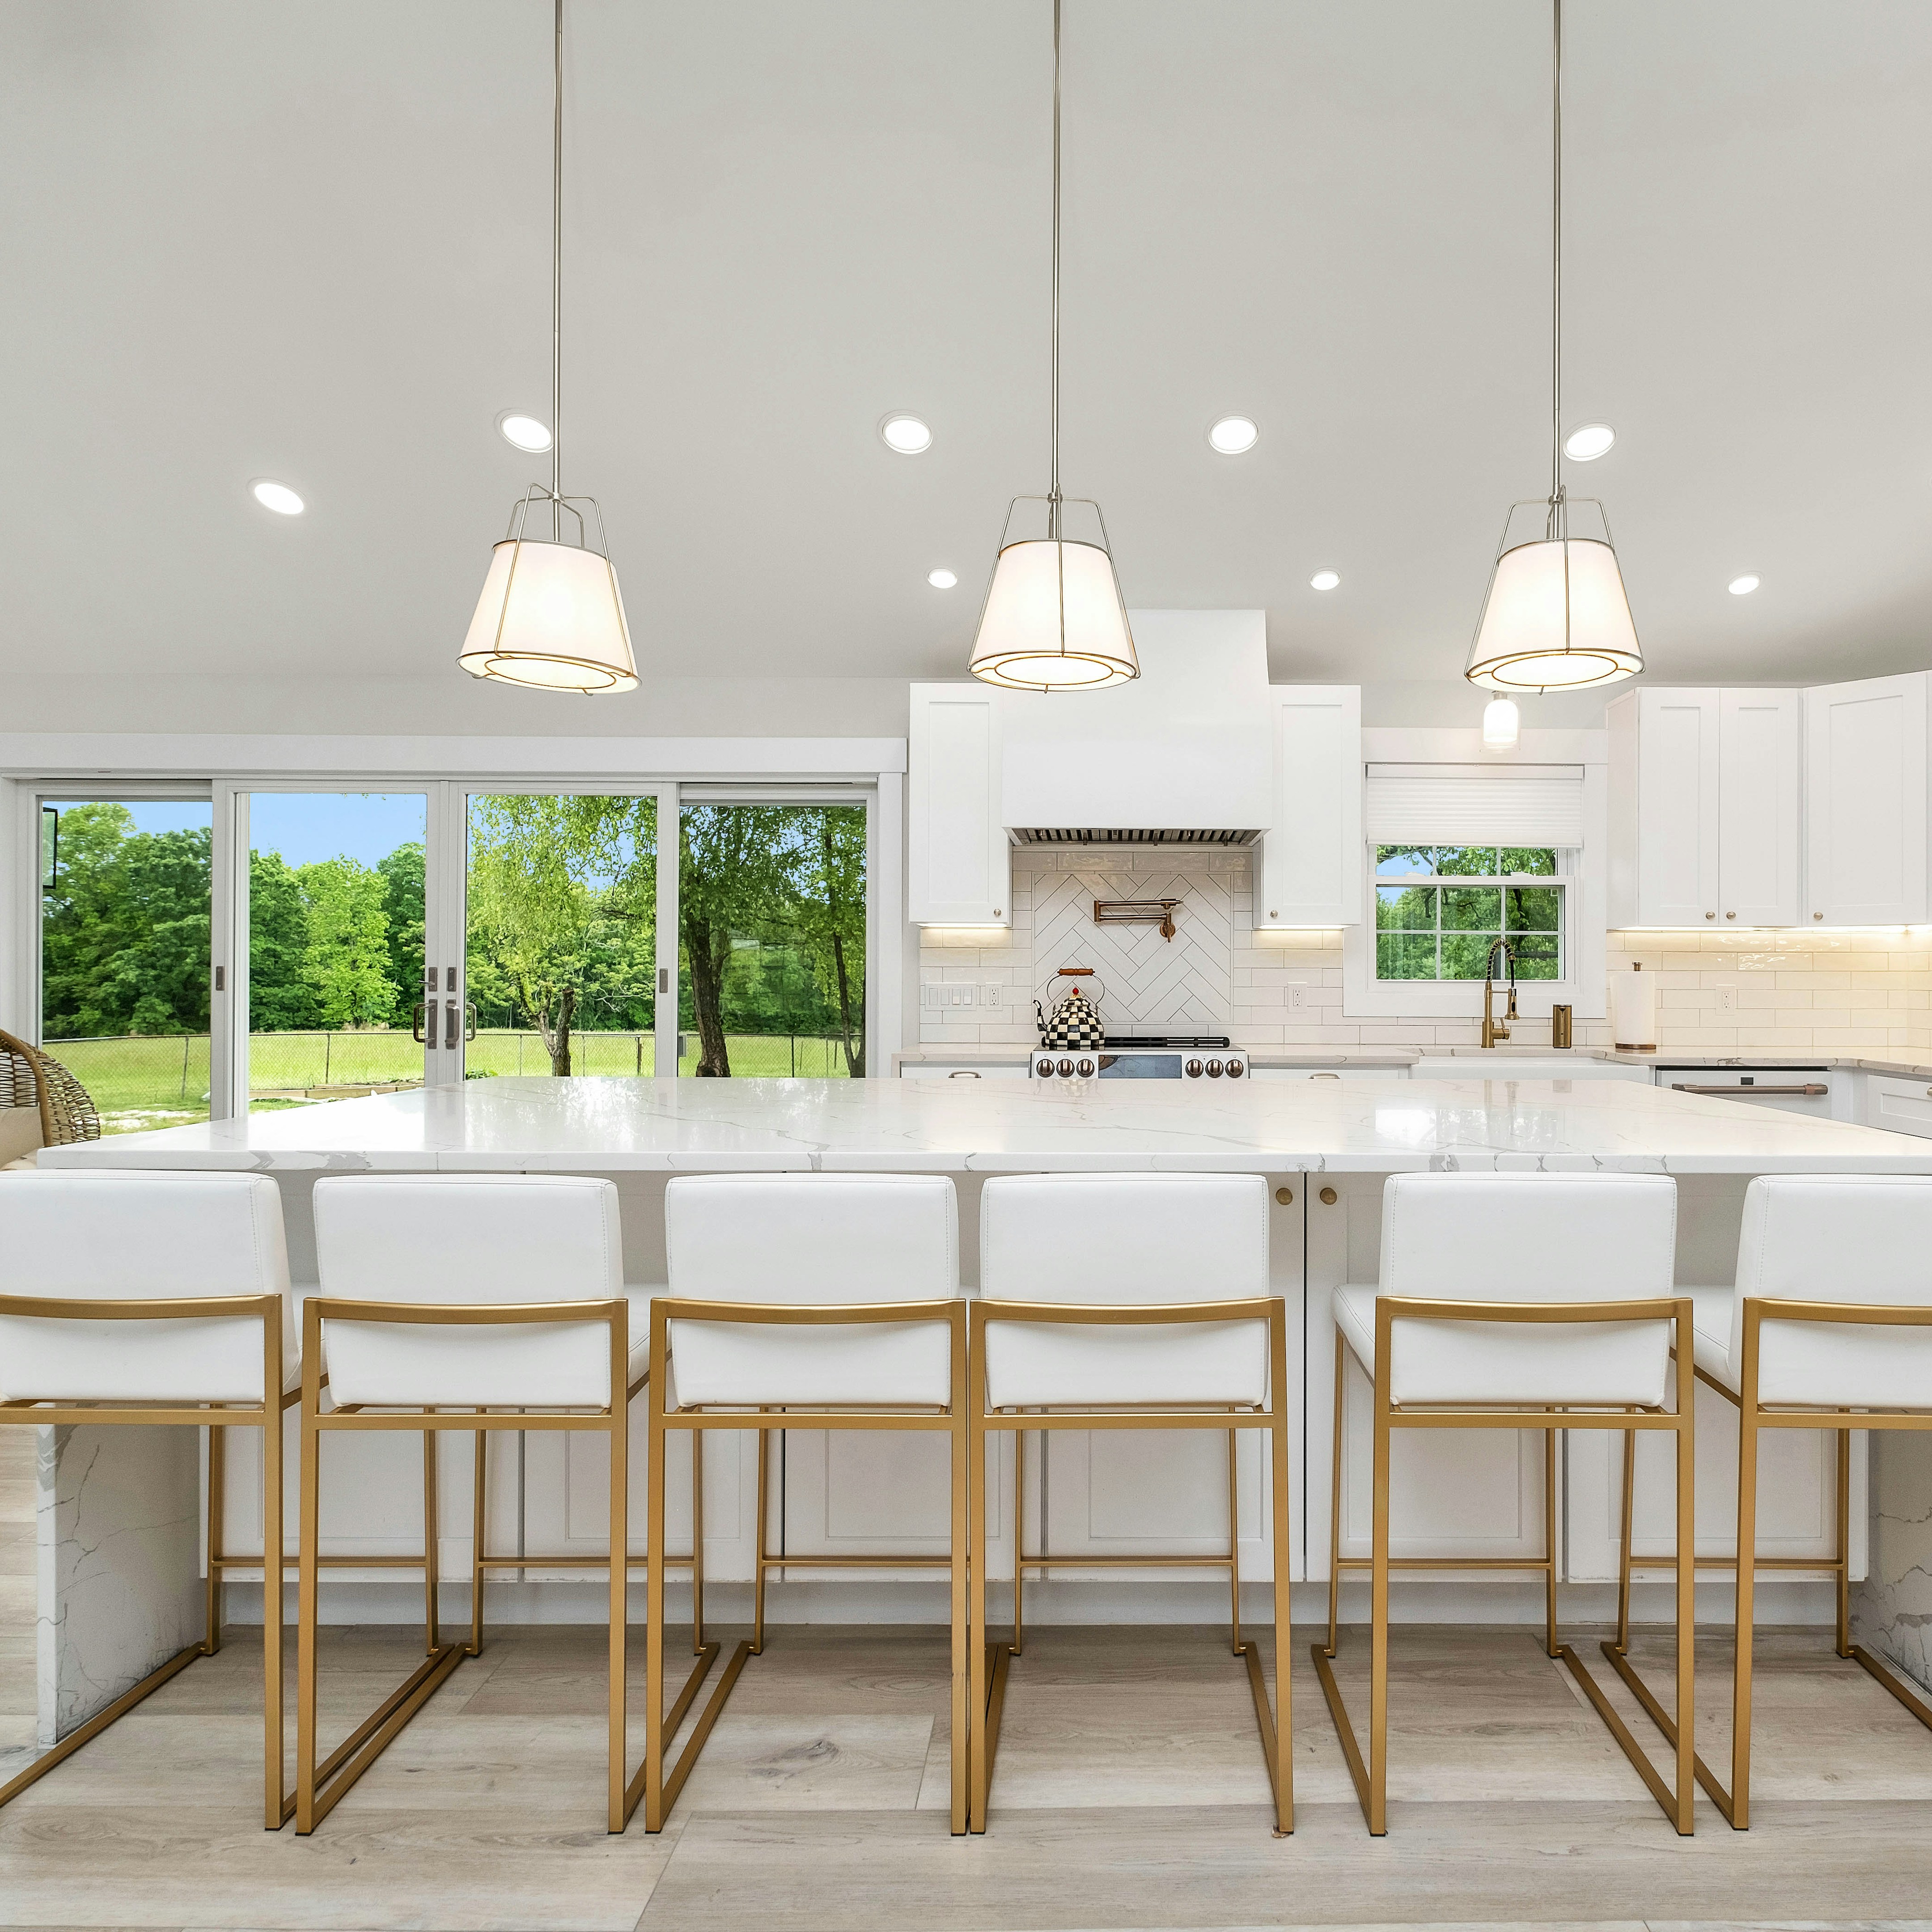 a large kitchen with a center island and white cabinets